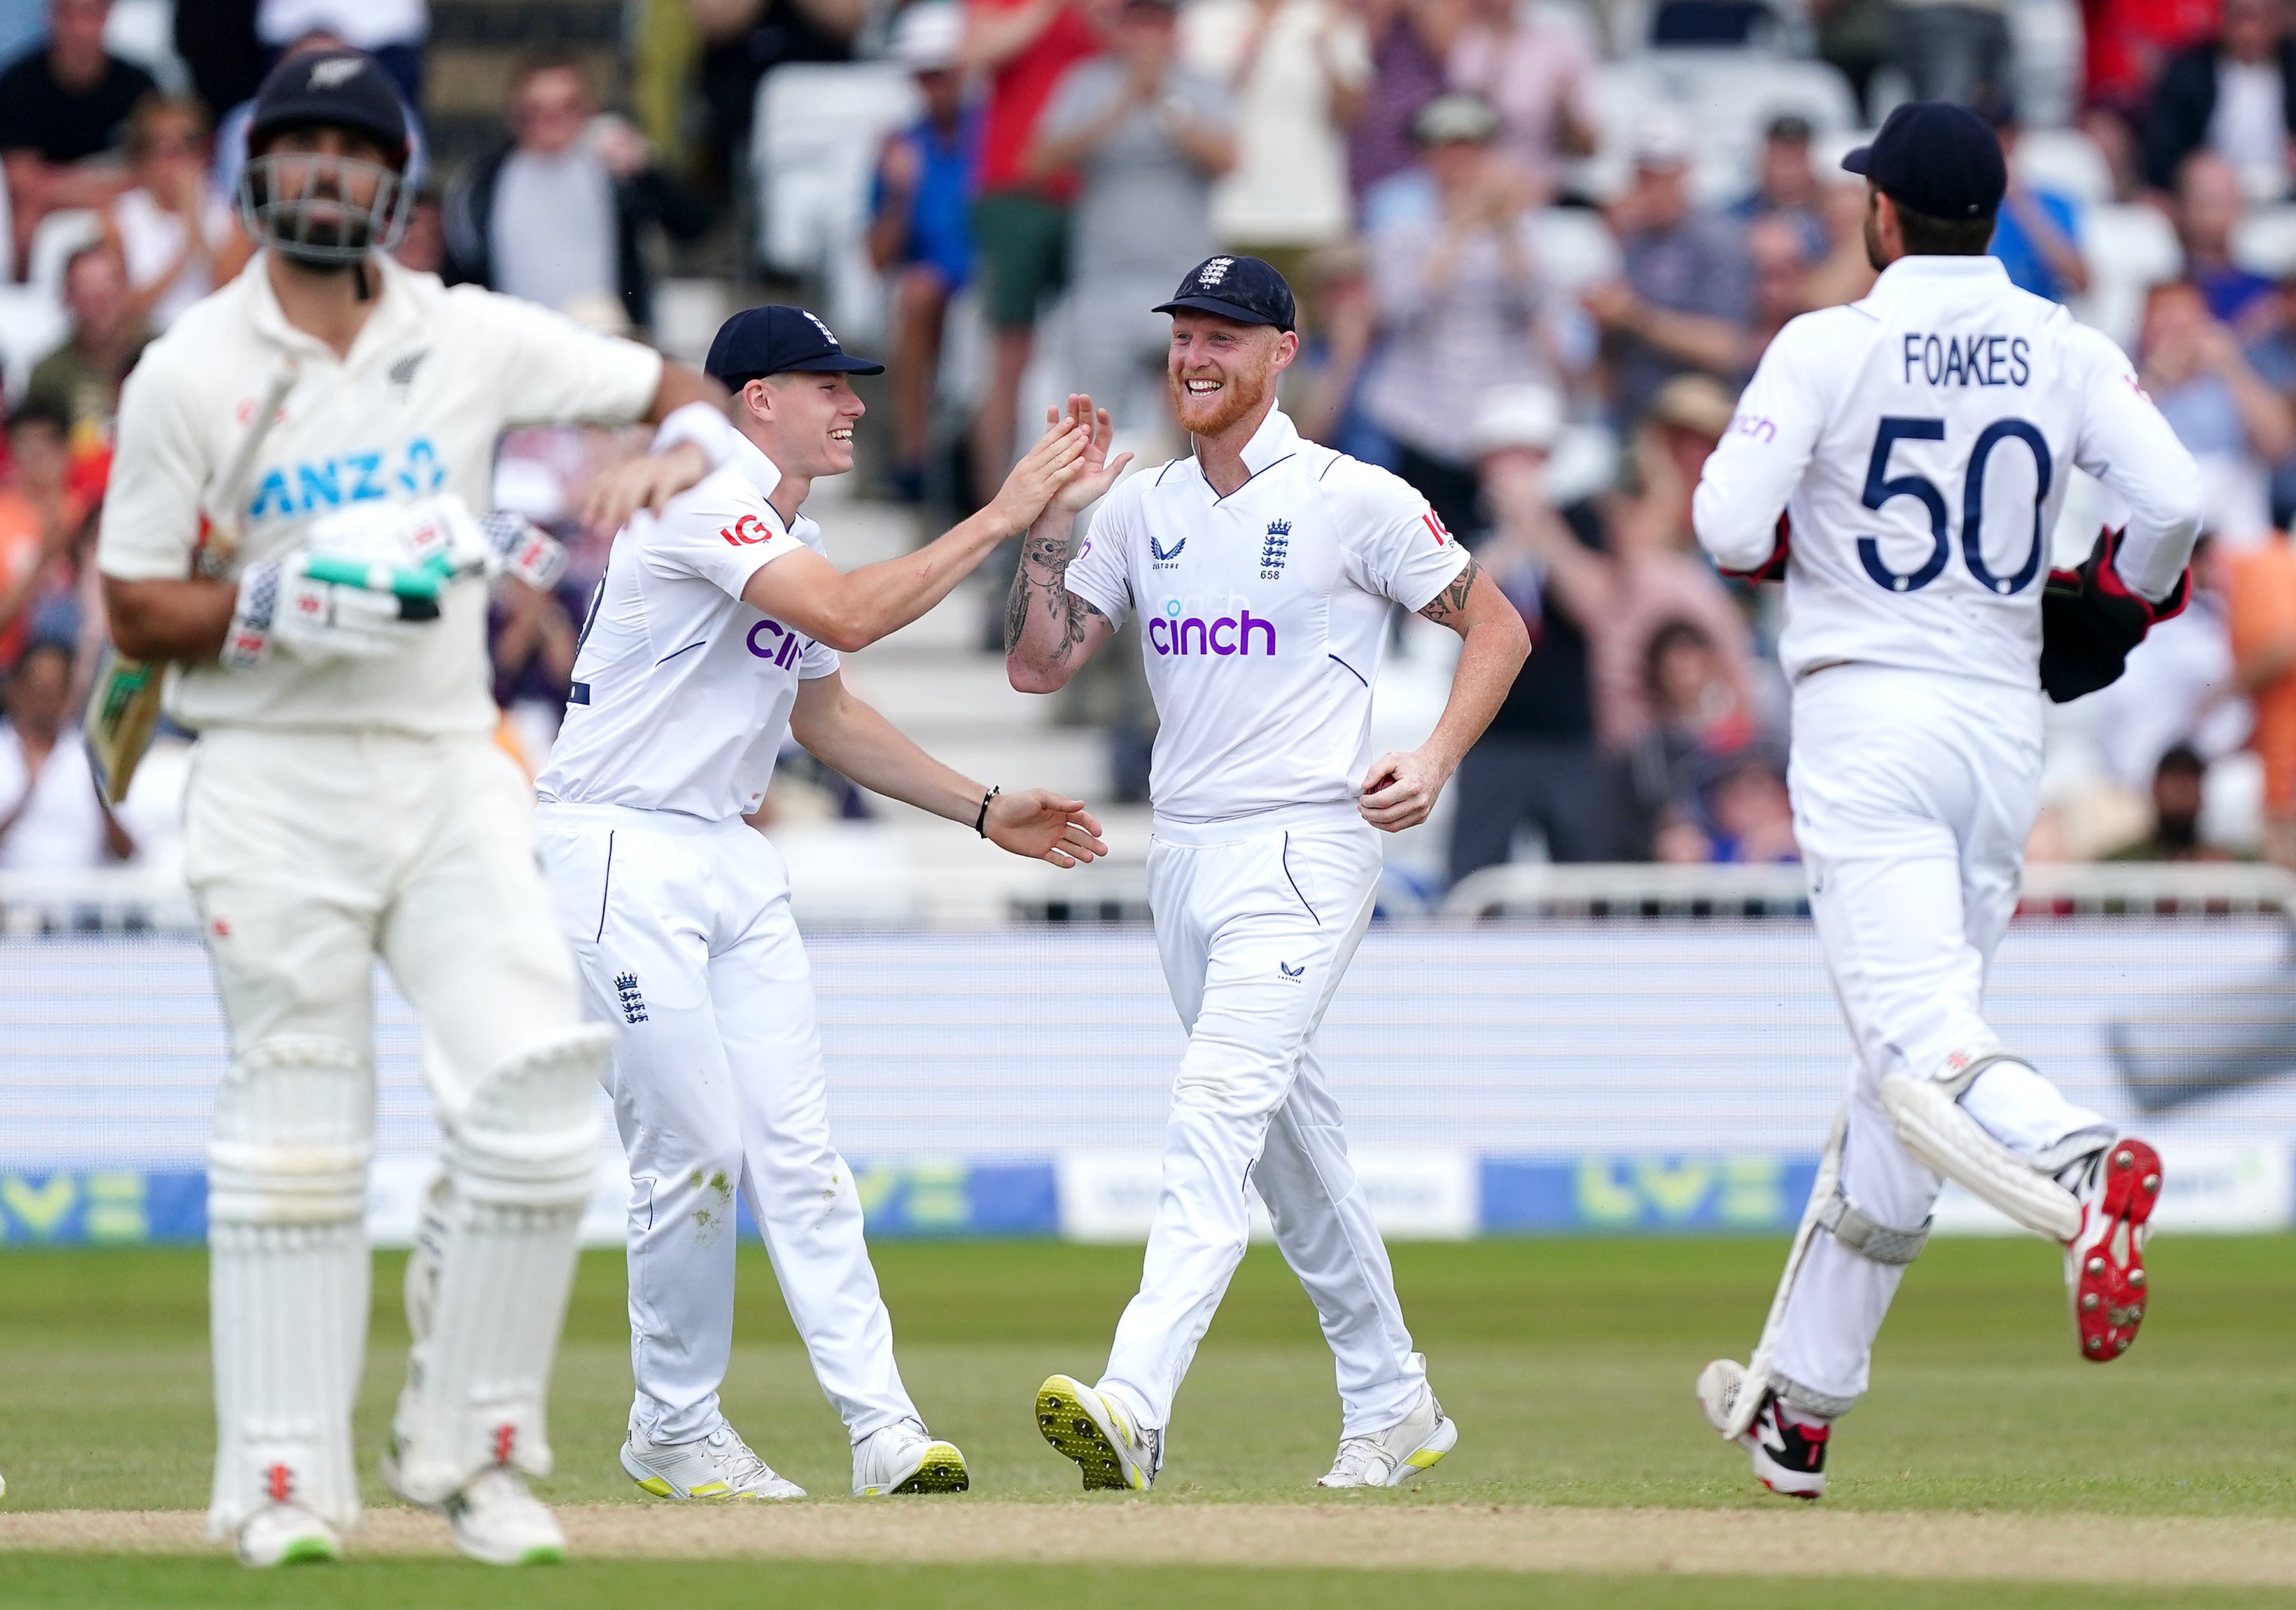 England captain Ben Stokes (centre) celebrates with team-mates after the dismissal of New Zealand’s last man Trent Boult (Mike Egerton/PA Images).